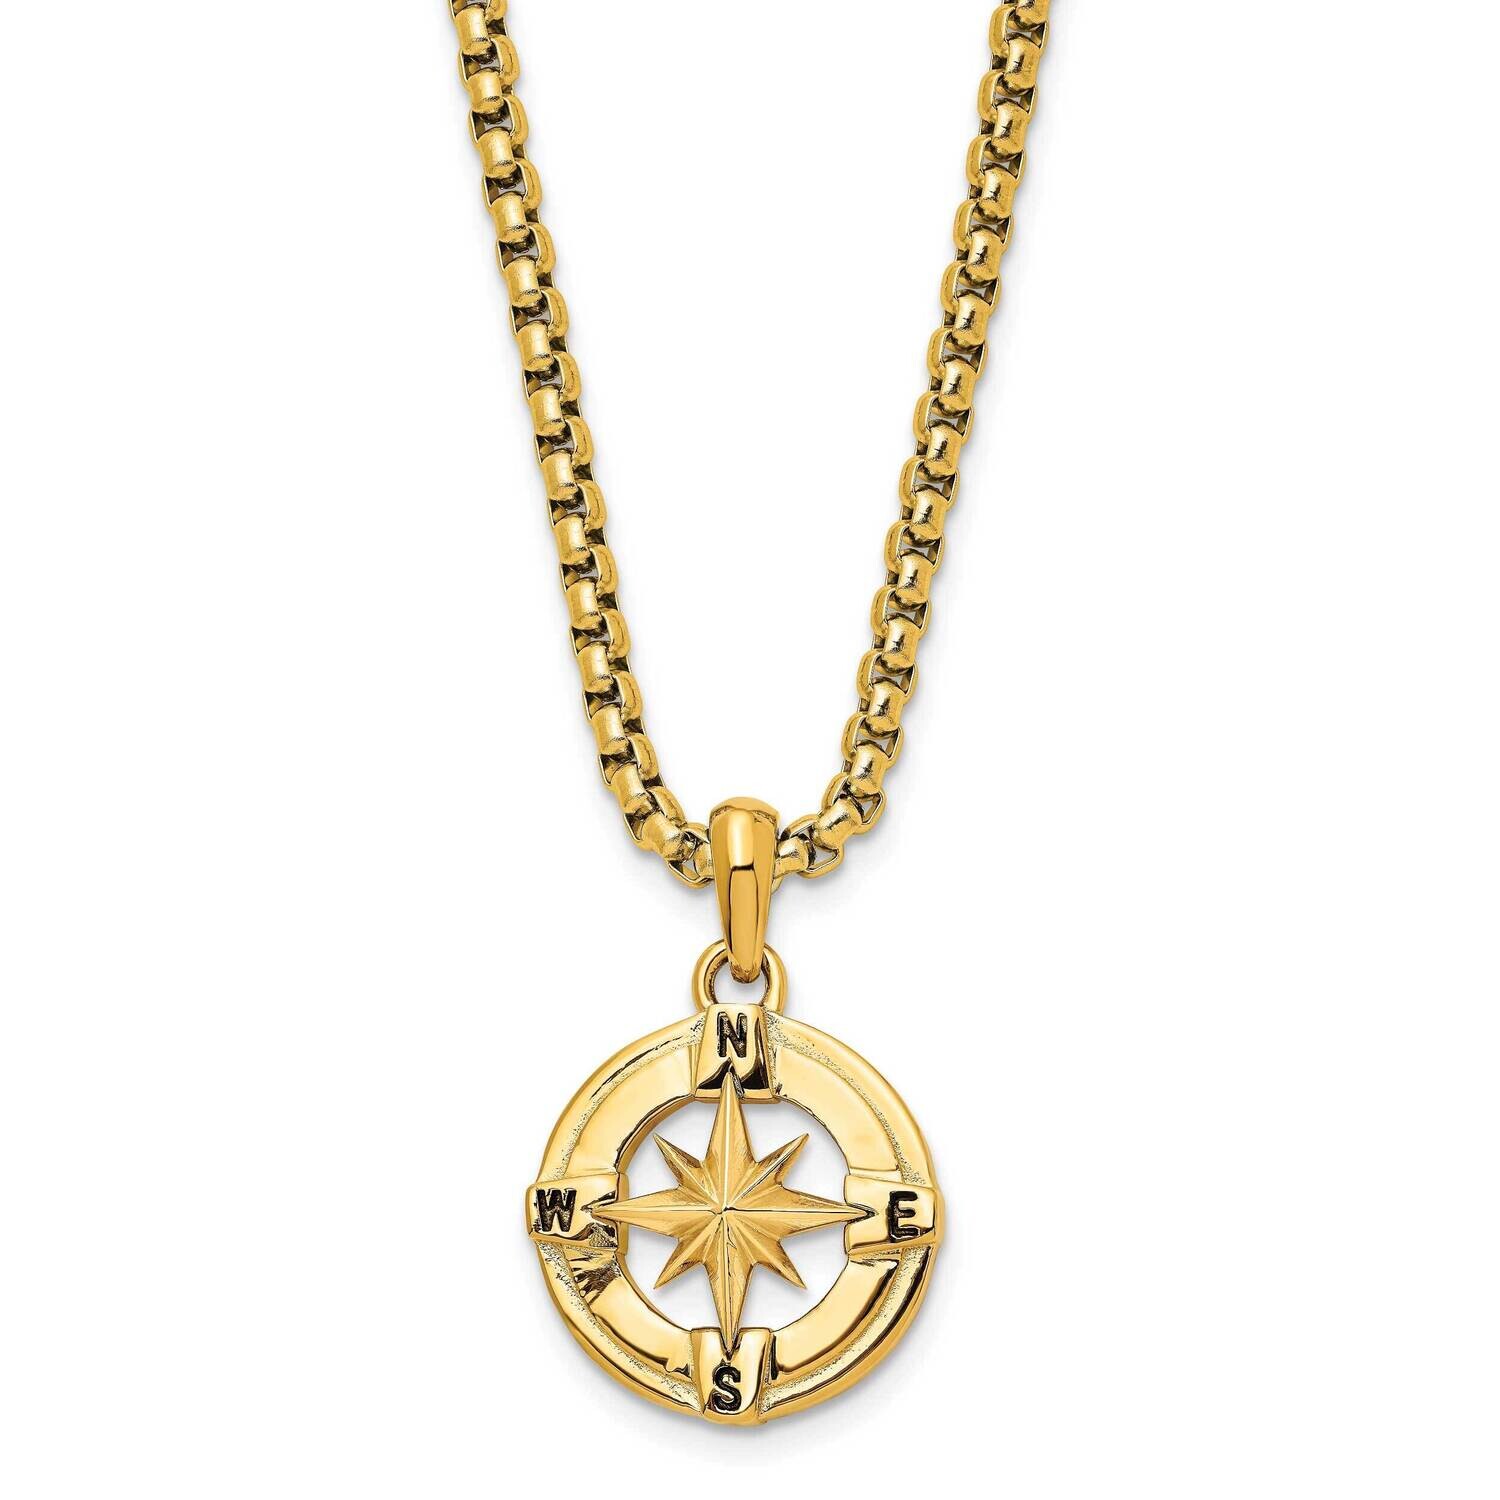 Chisel Polished Yellow Ip-Plated Compass Pendant On A 22 Inch Box Chain Necklace Stainless Steel SRN3075Y-22